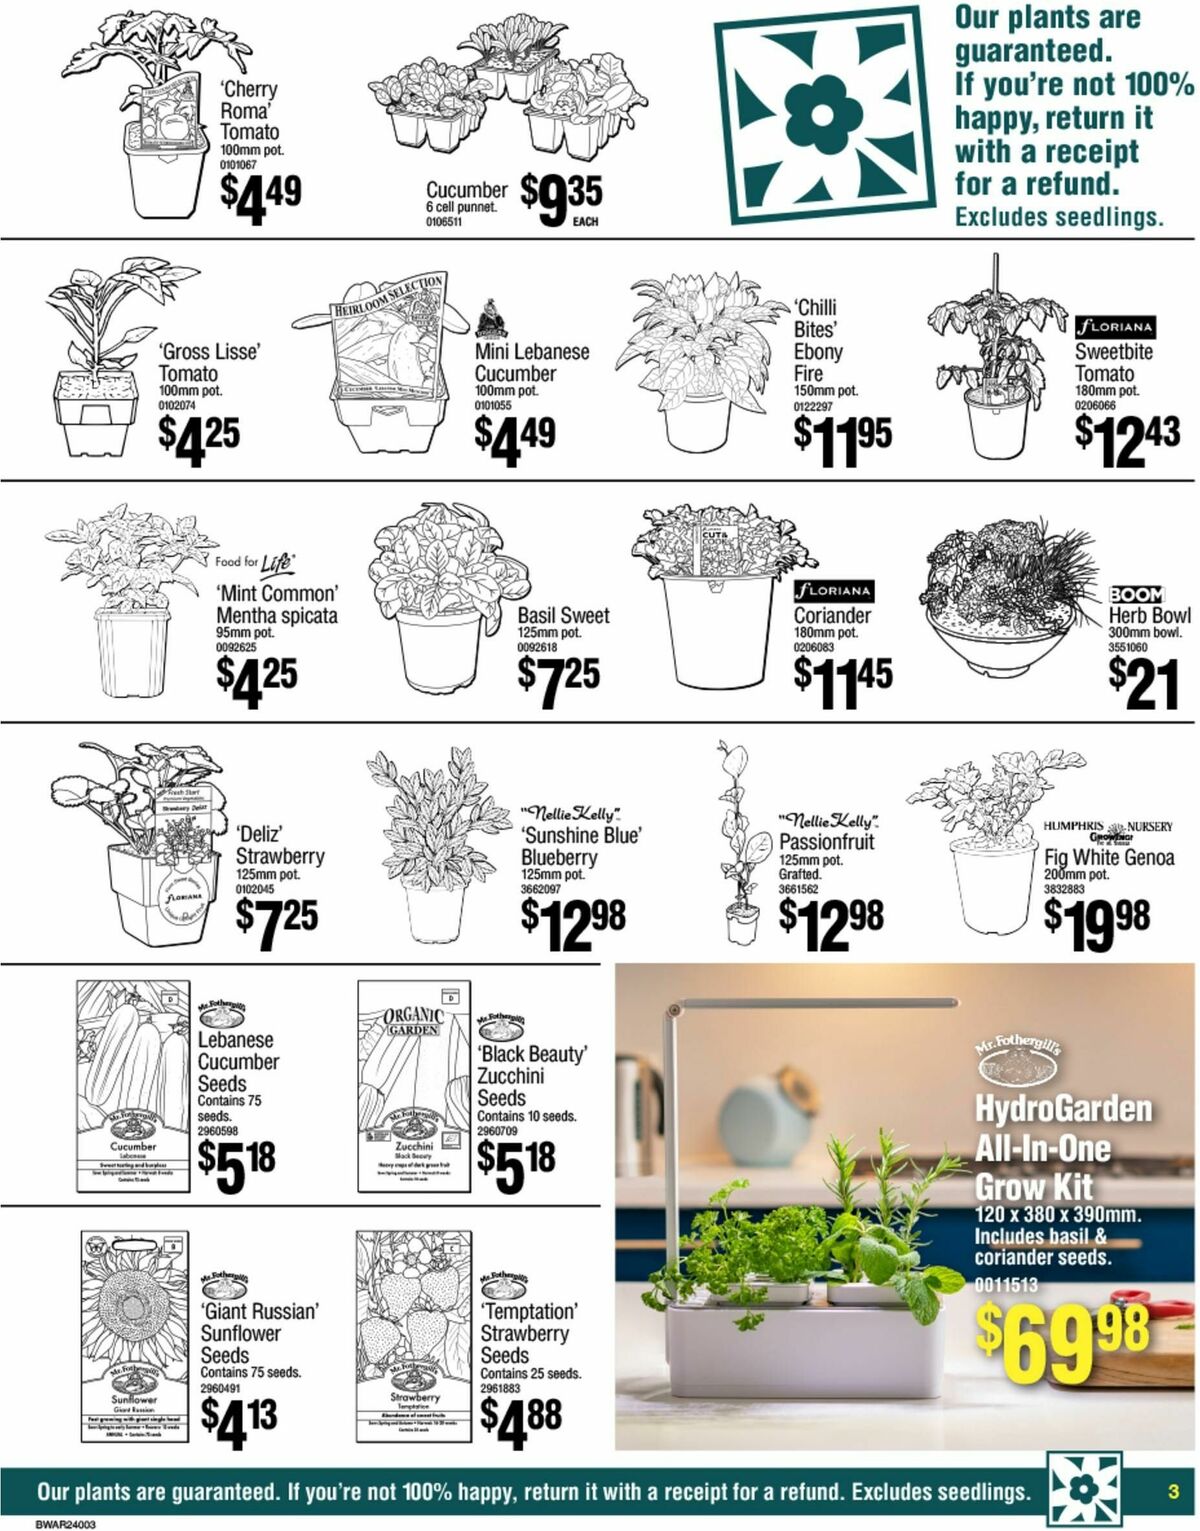 Bunnings Warehouse Catalogues from 4 September